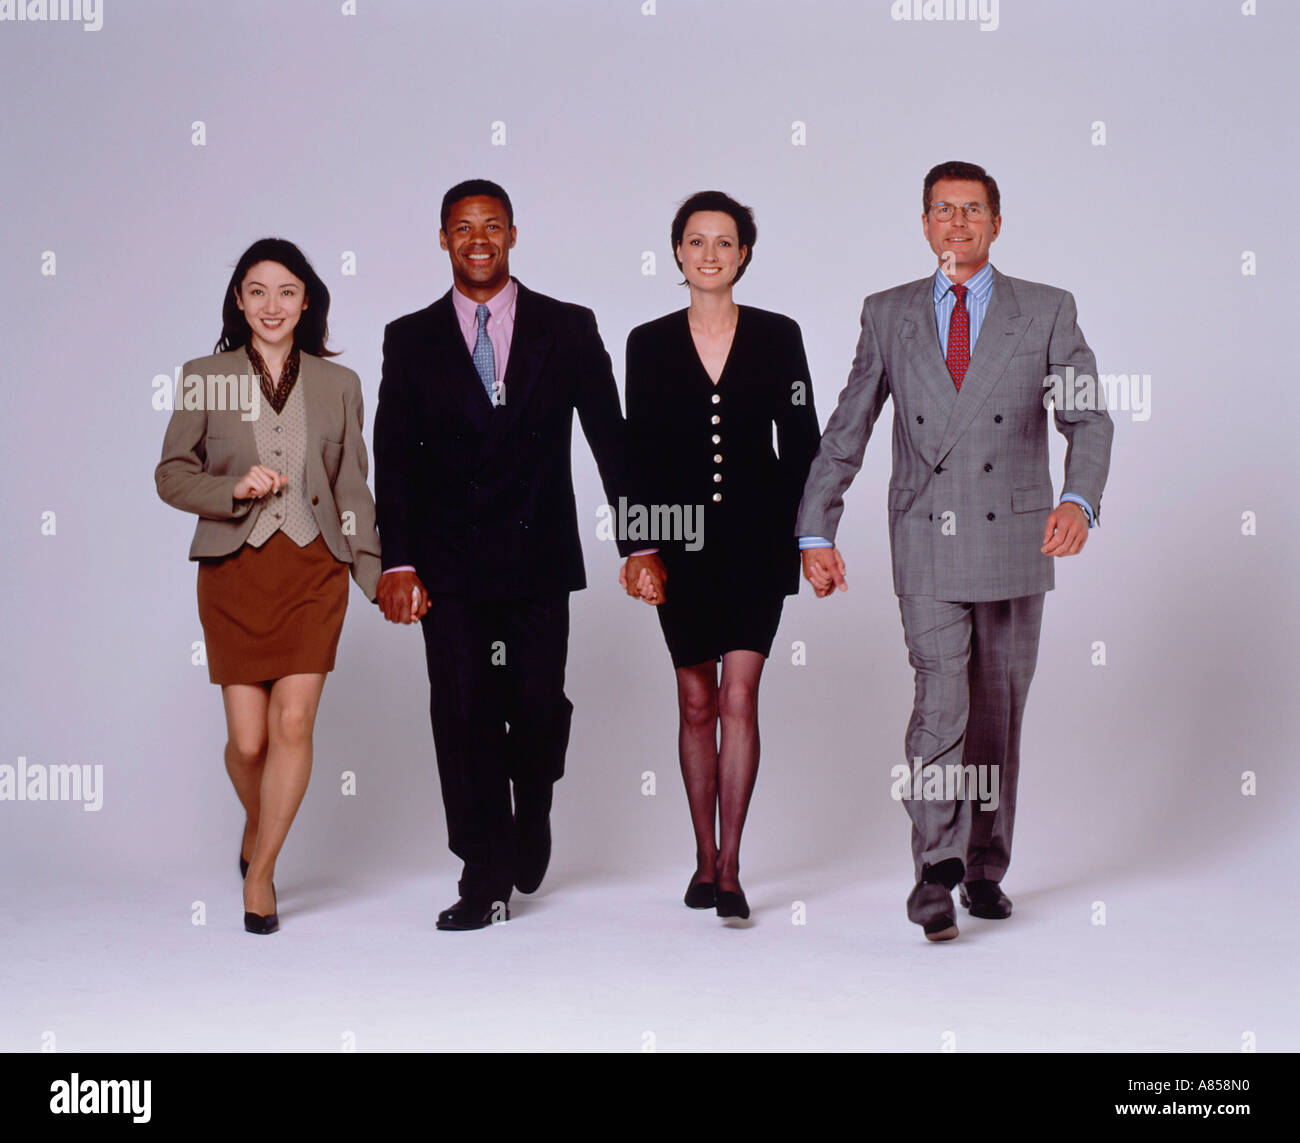 Studio image of a team of four people.  Two men and two women wearing business suits and walking towards camera. Stock Photo